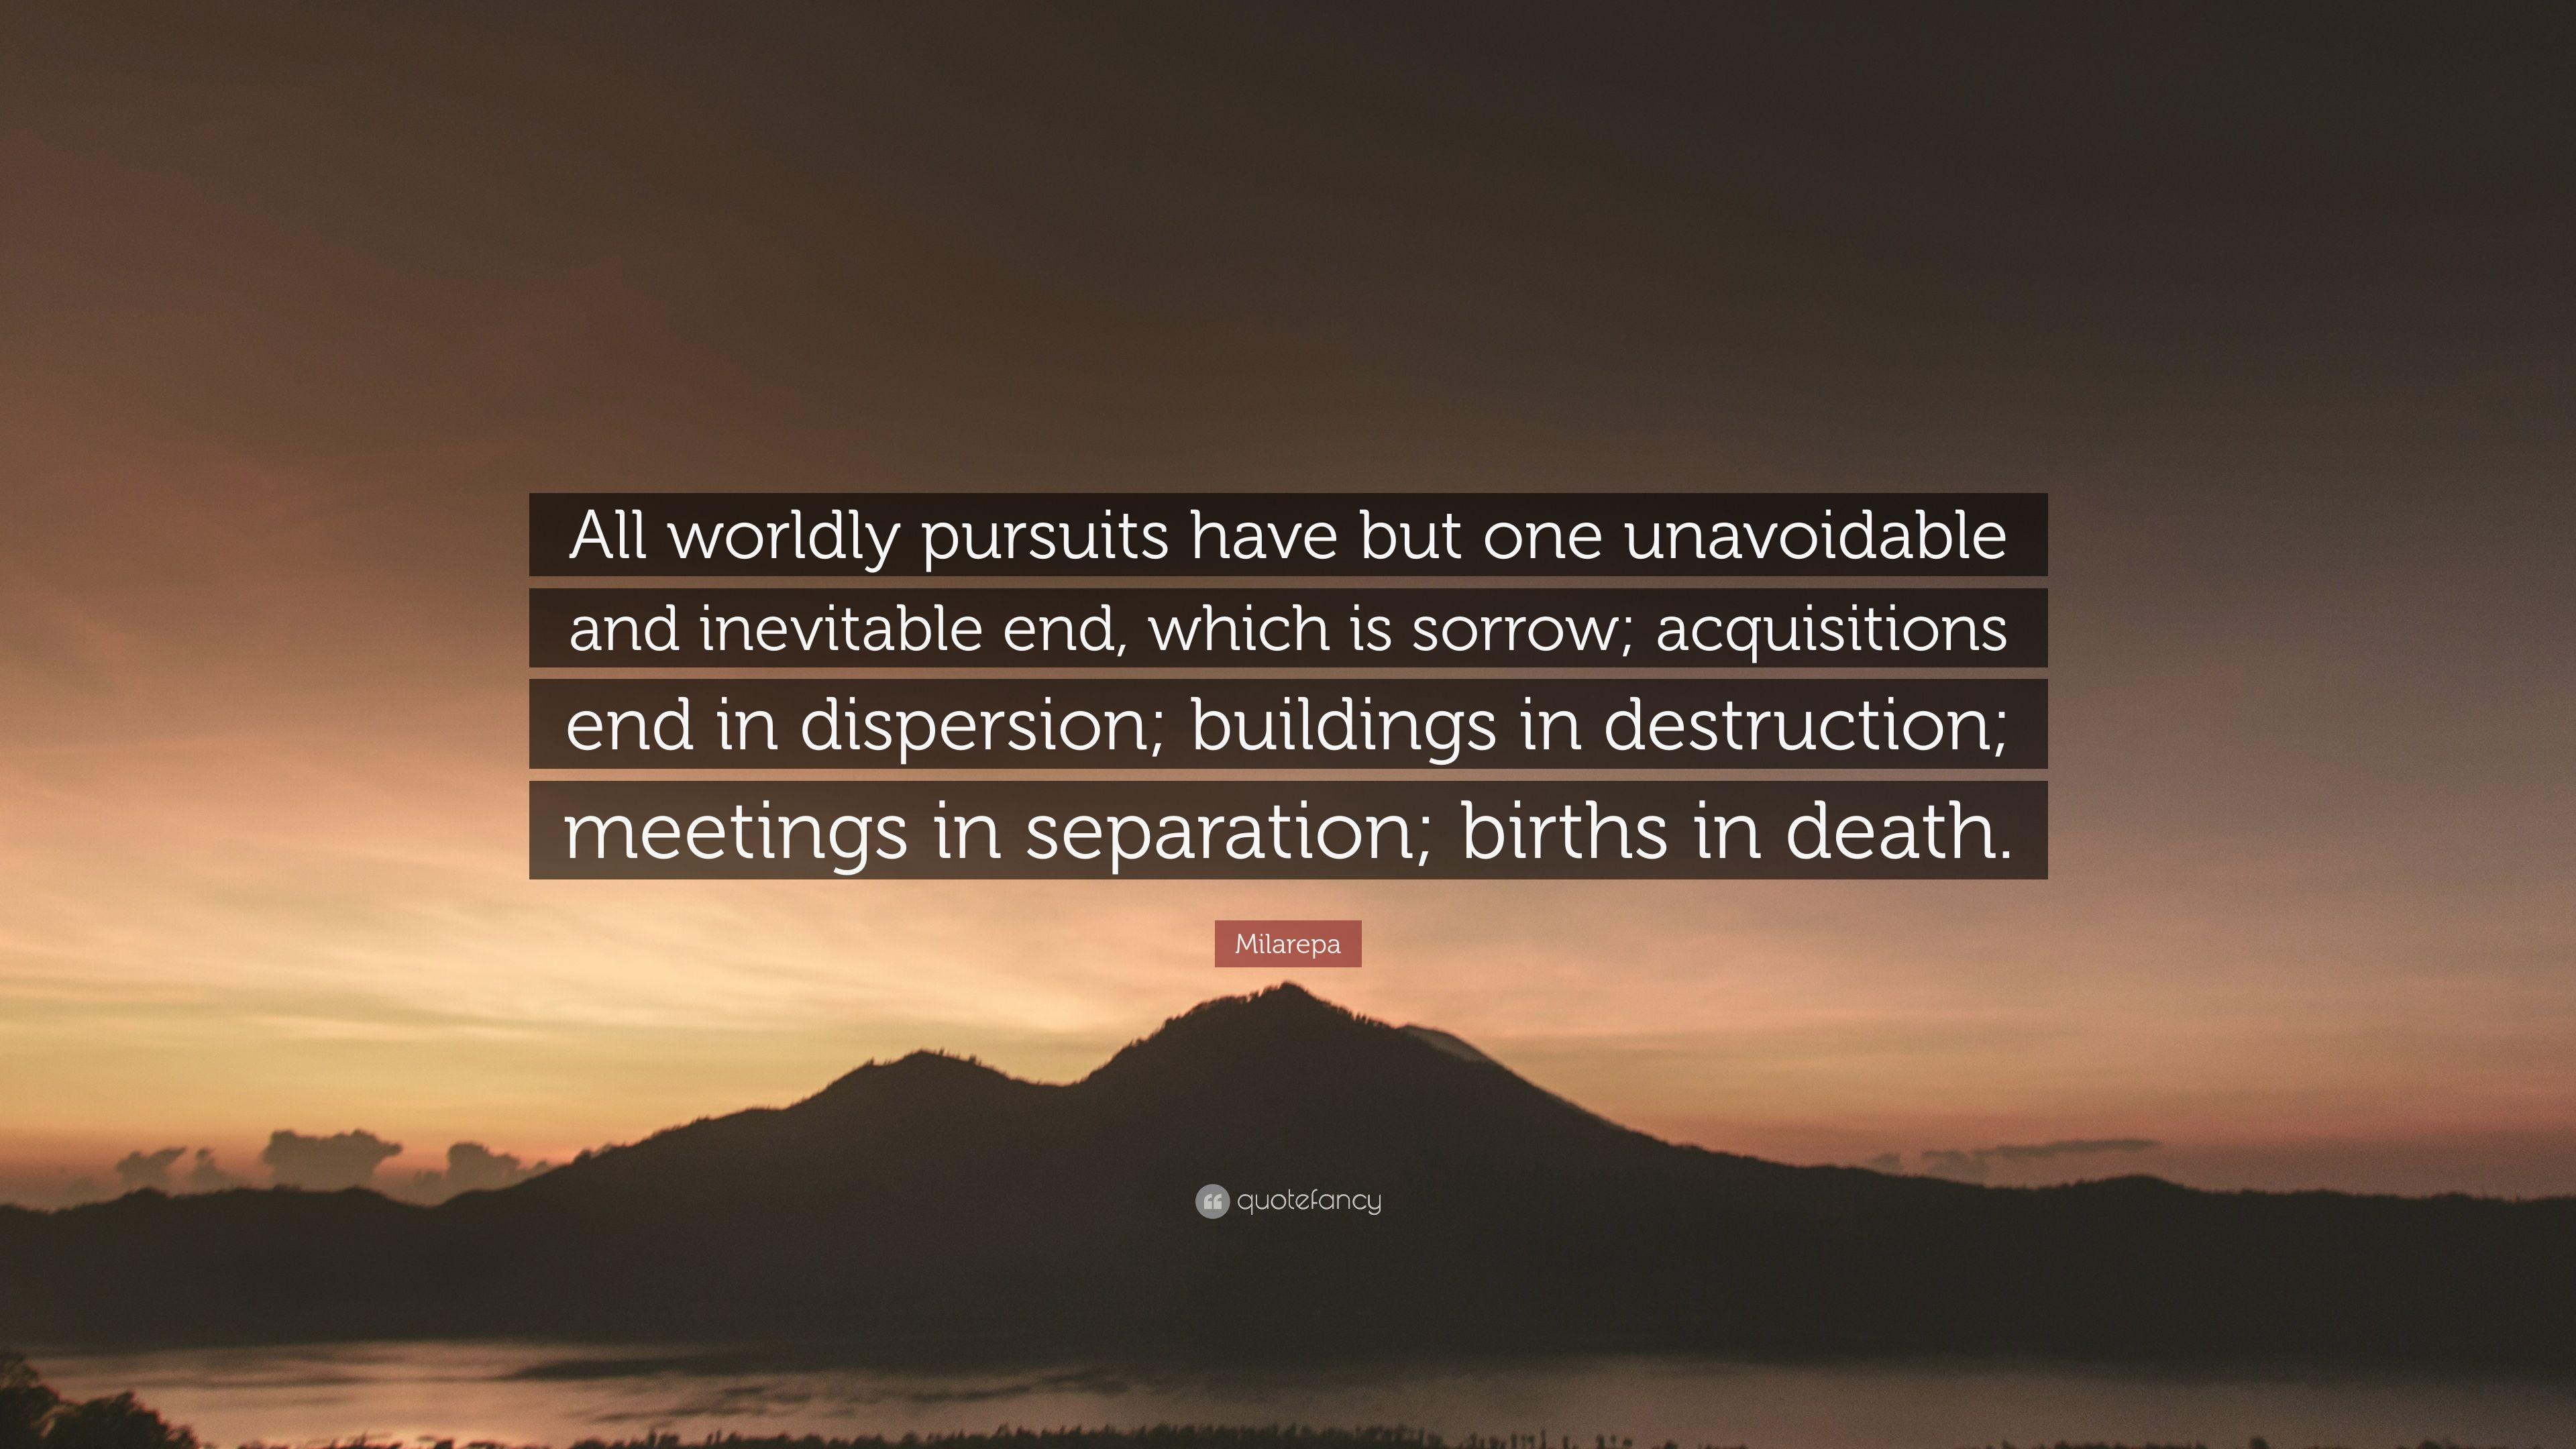 Milarepa Quote: “All worldly pursuits have but one unavoidable